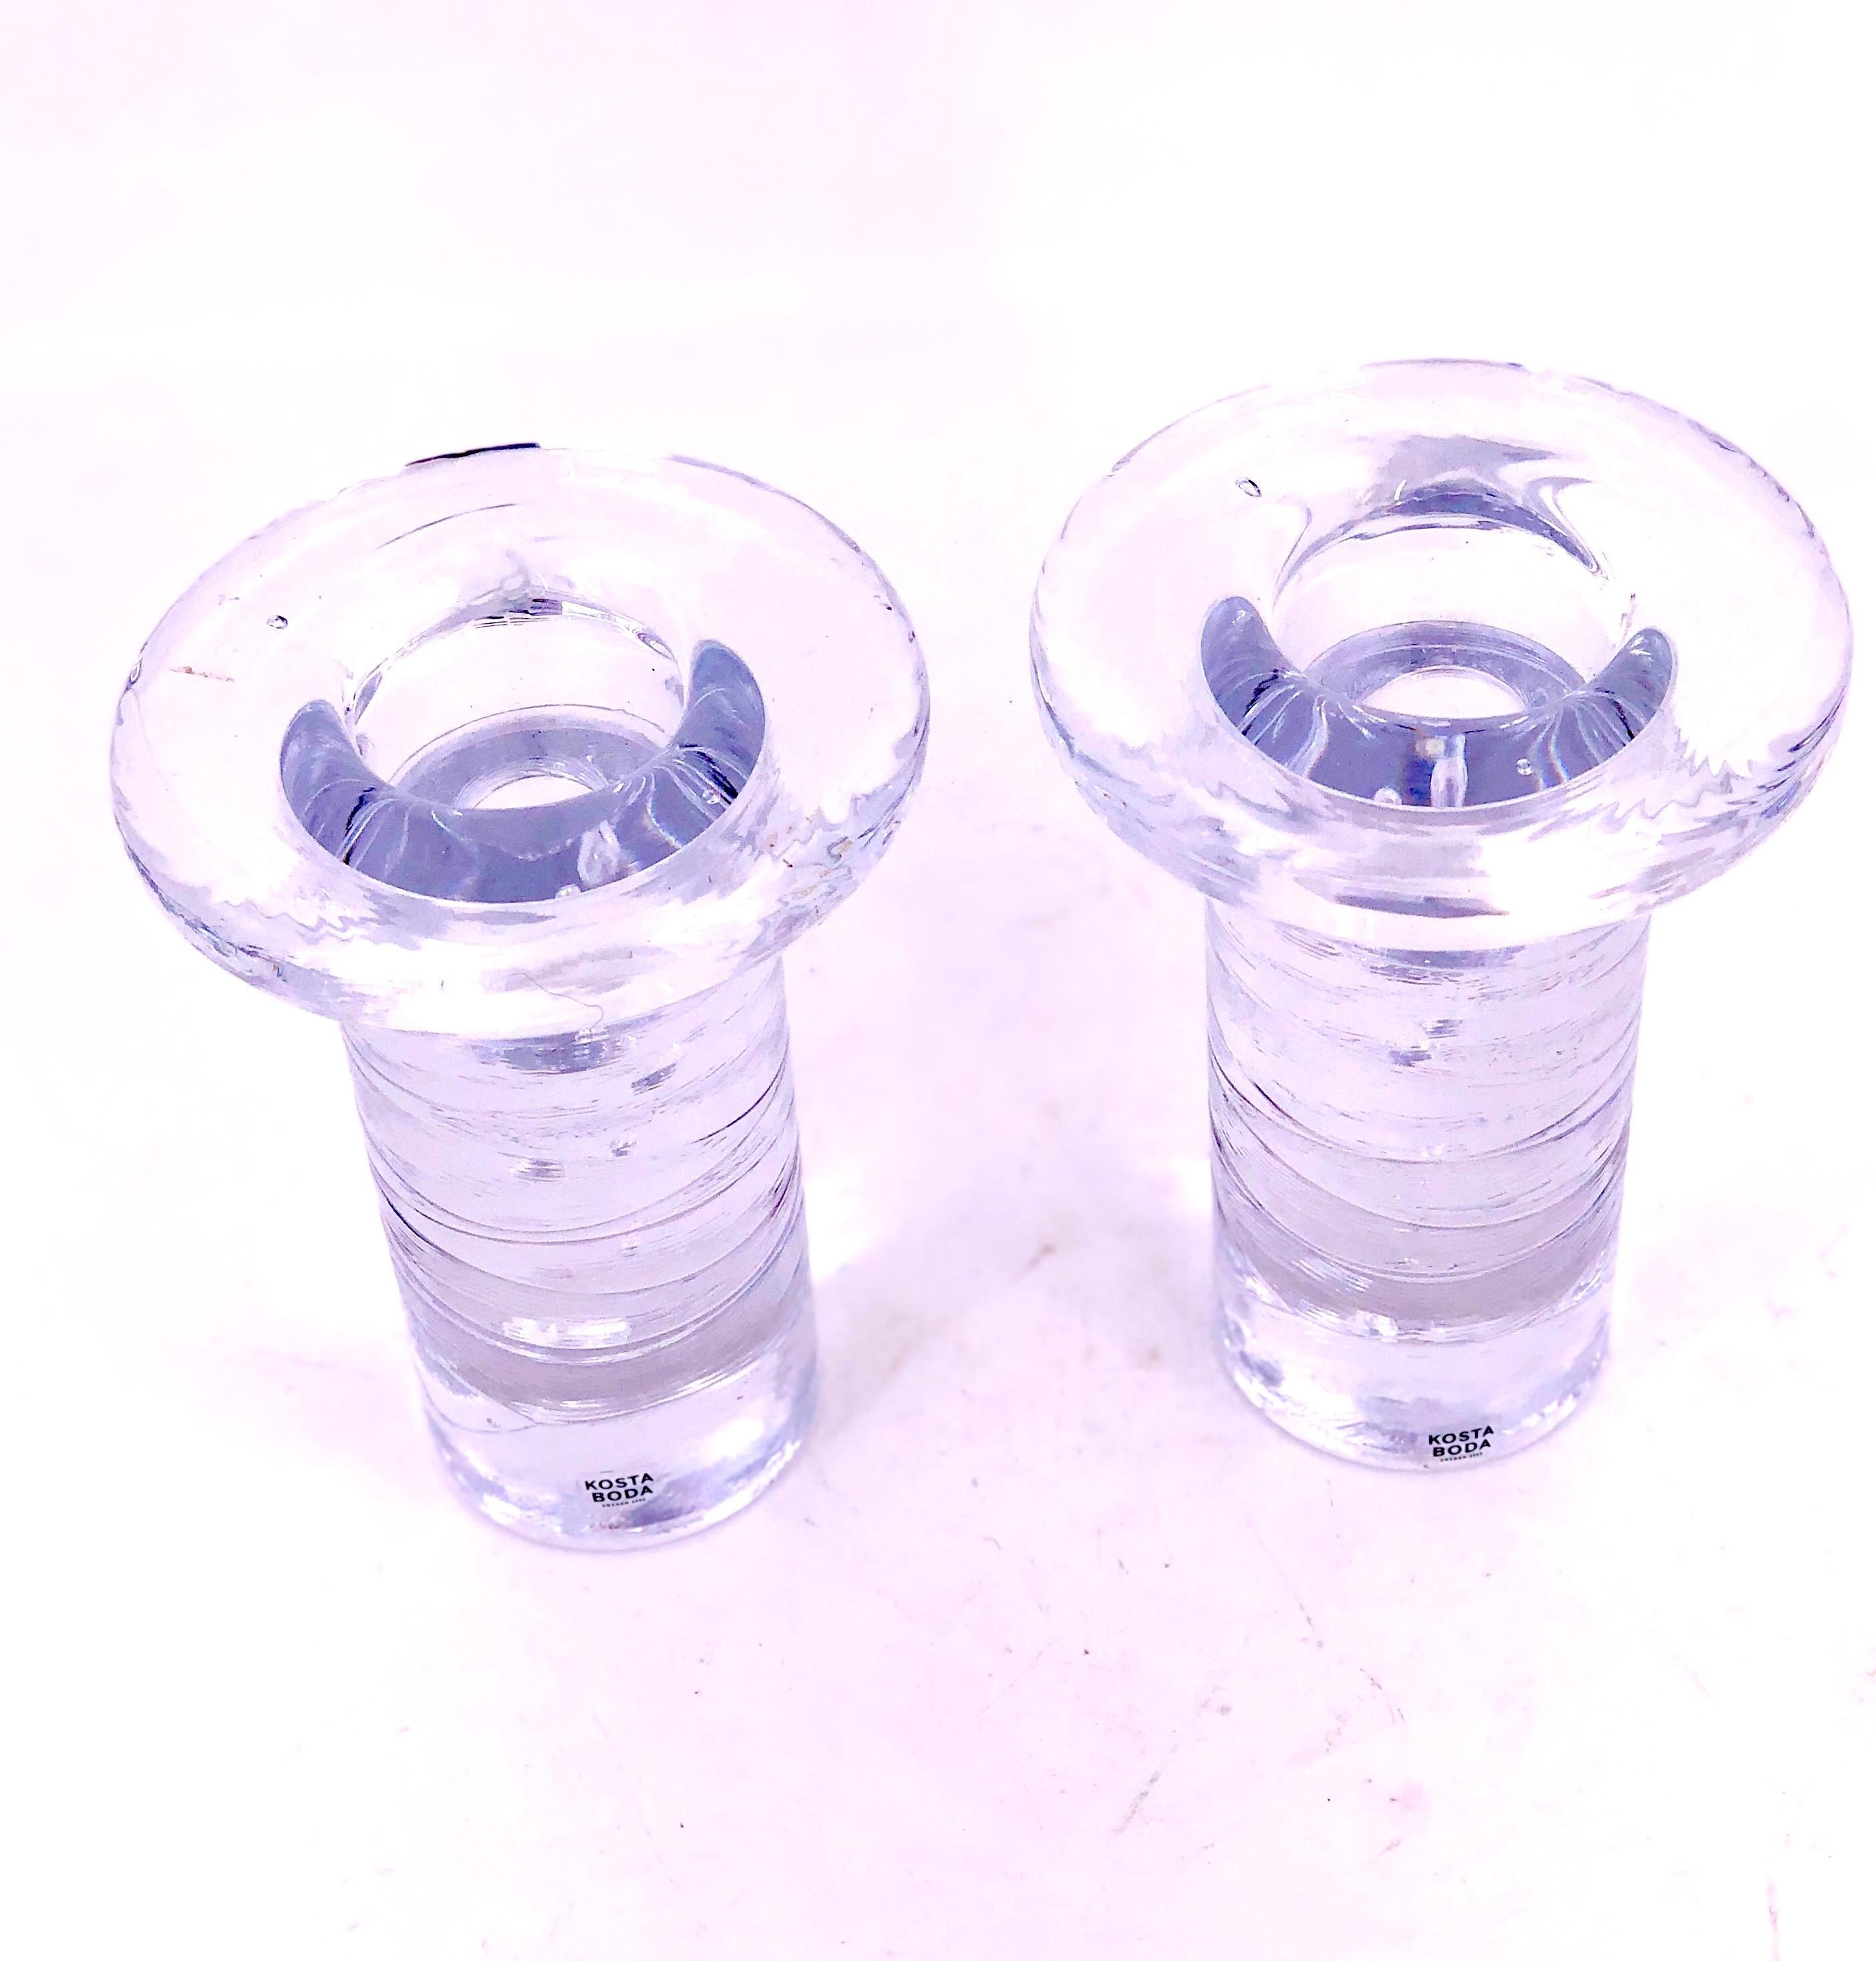 A beautiful pair of clear glass candleholders circa 1970s, in perfect condition no chips or cracks.